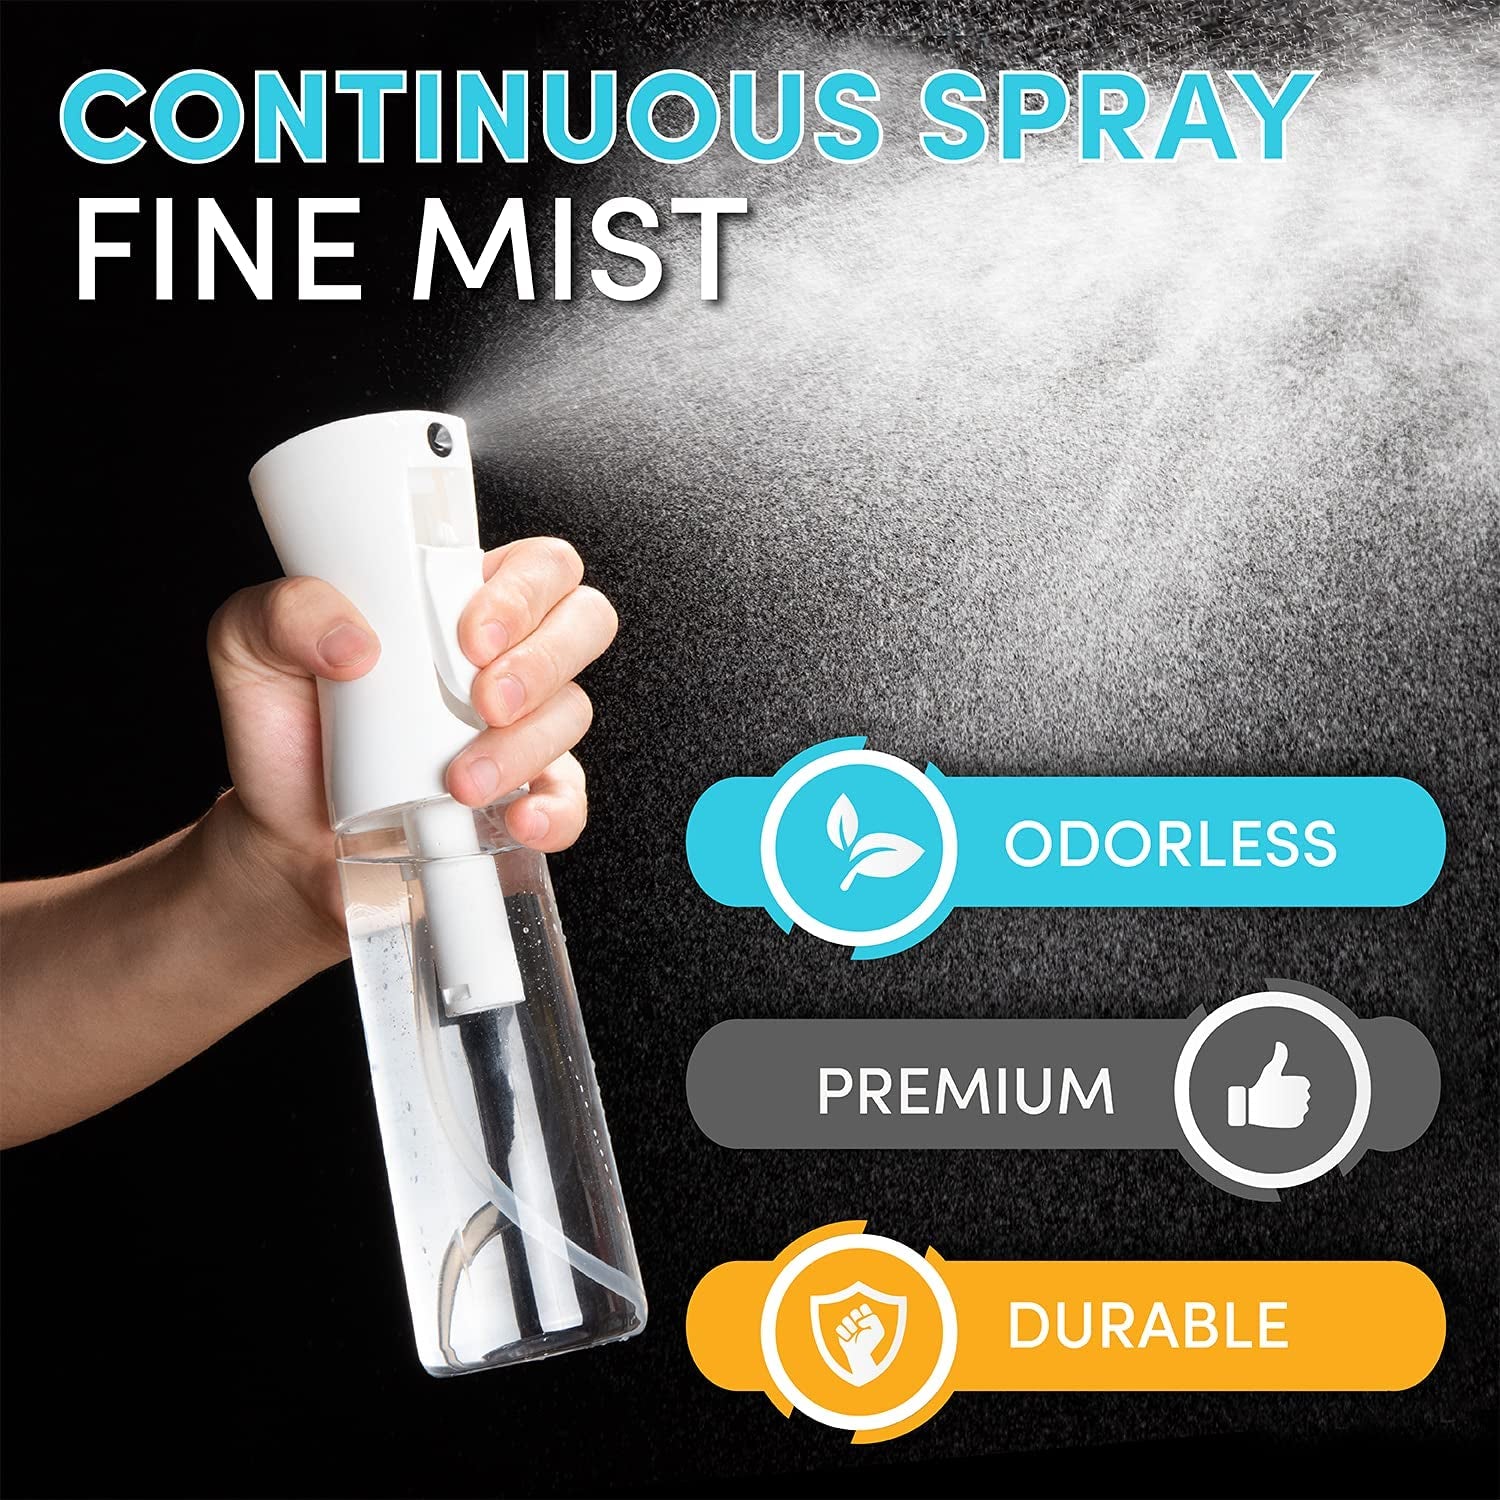 Continuous Spray Bottle for Hair (10.1Oz/300Ml) Mist Empty Ultra Fine Plastic Water Sprayer – for Hairstyling, Cleaning, Salons, Plants, Essential Oil Scents & More - White